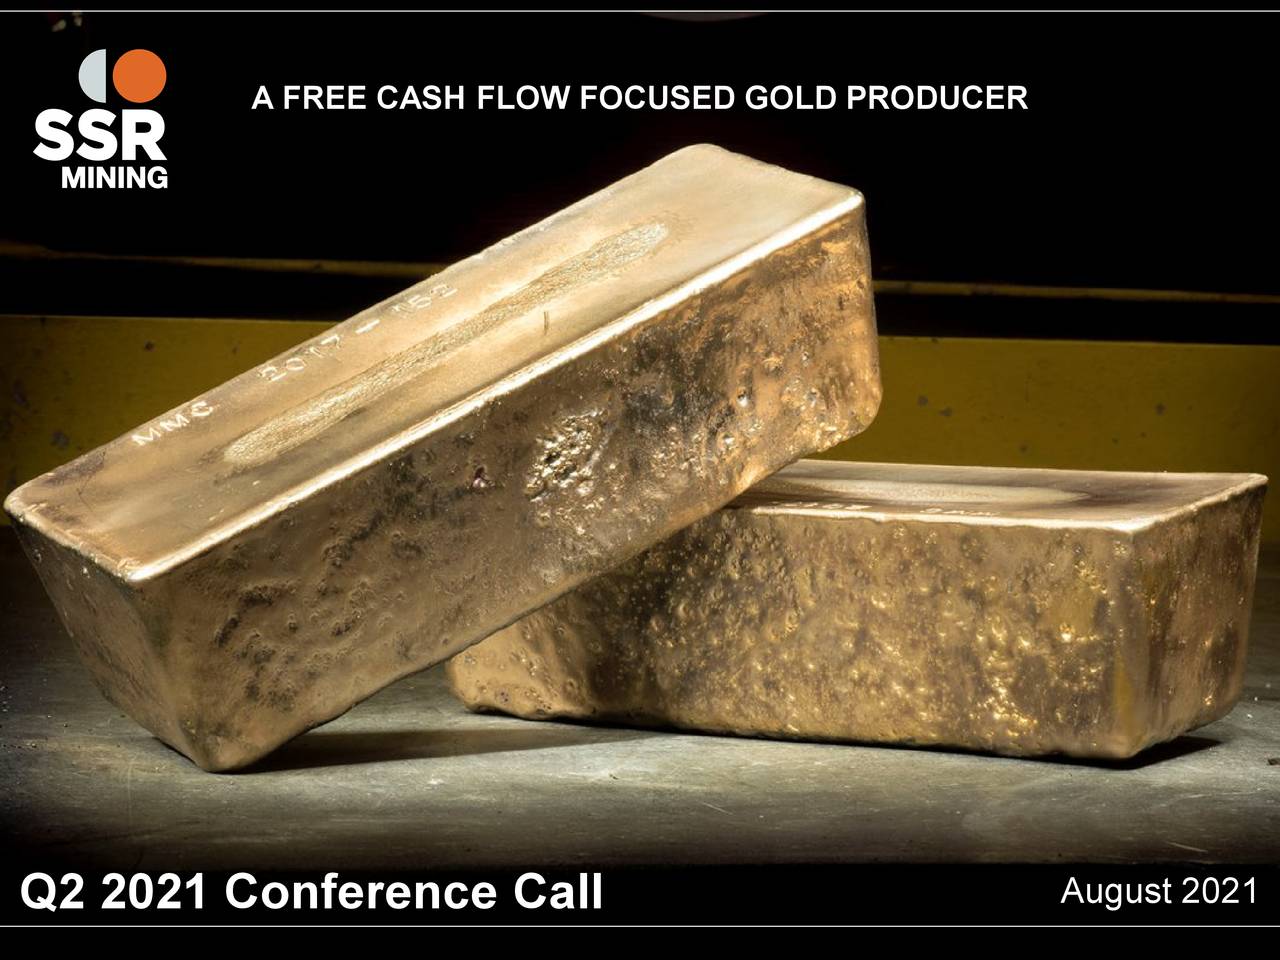 A FREE CASH FLOW FOCUSED GOLD PRODUCER